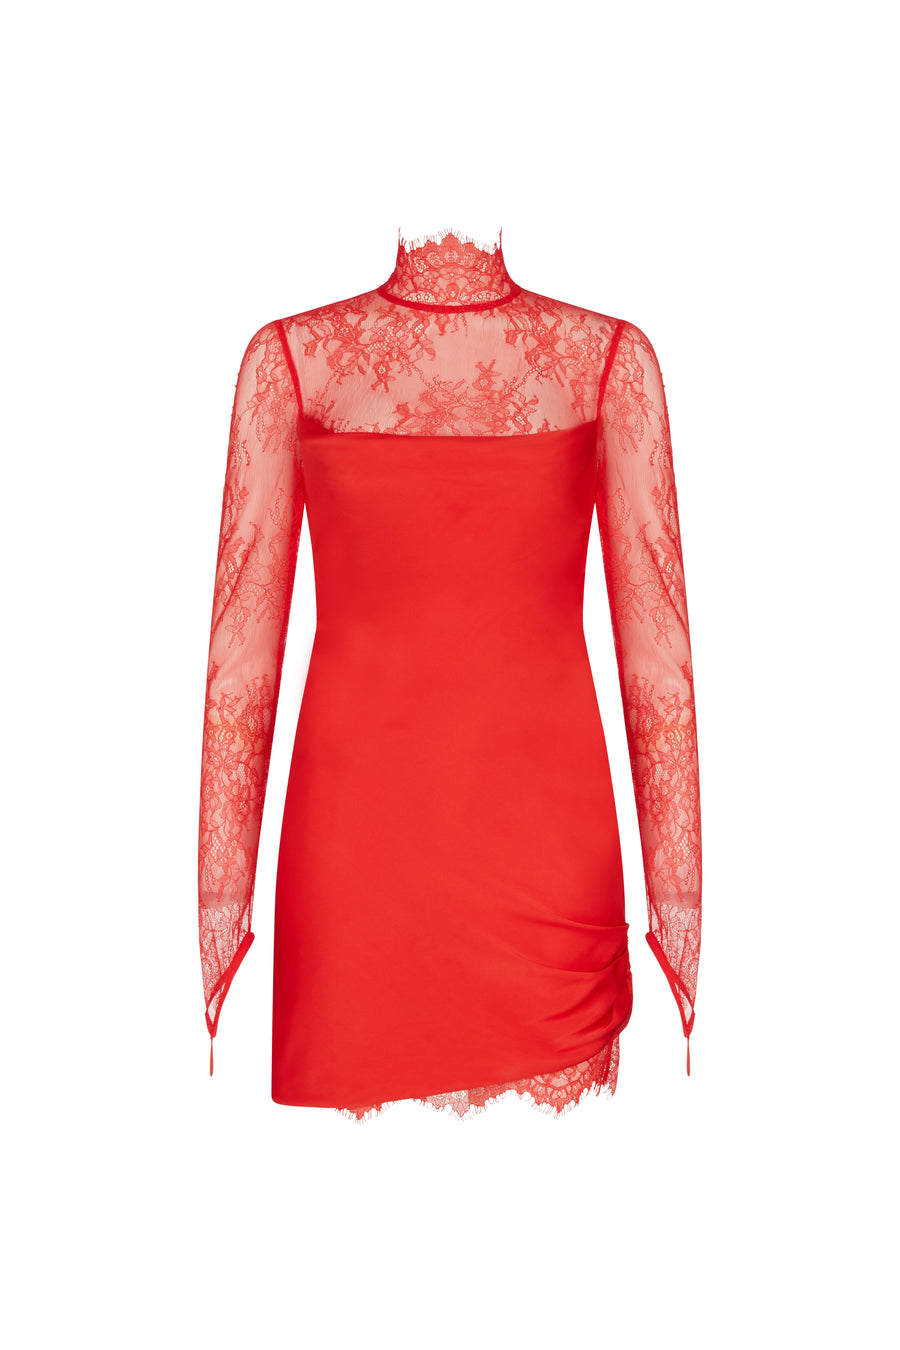 CROISSANT MINI DRESS IN RED SILK SATIN AND LACE